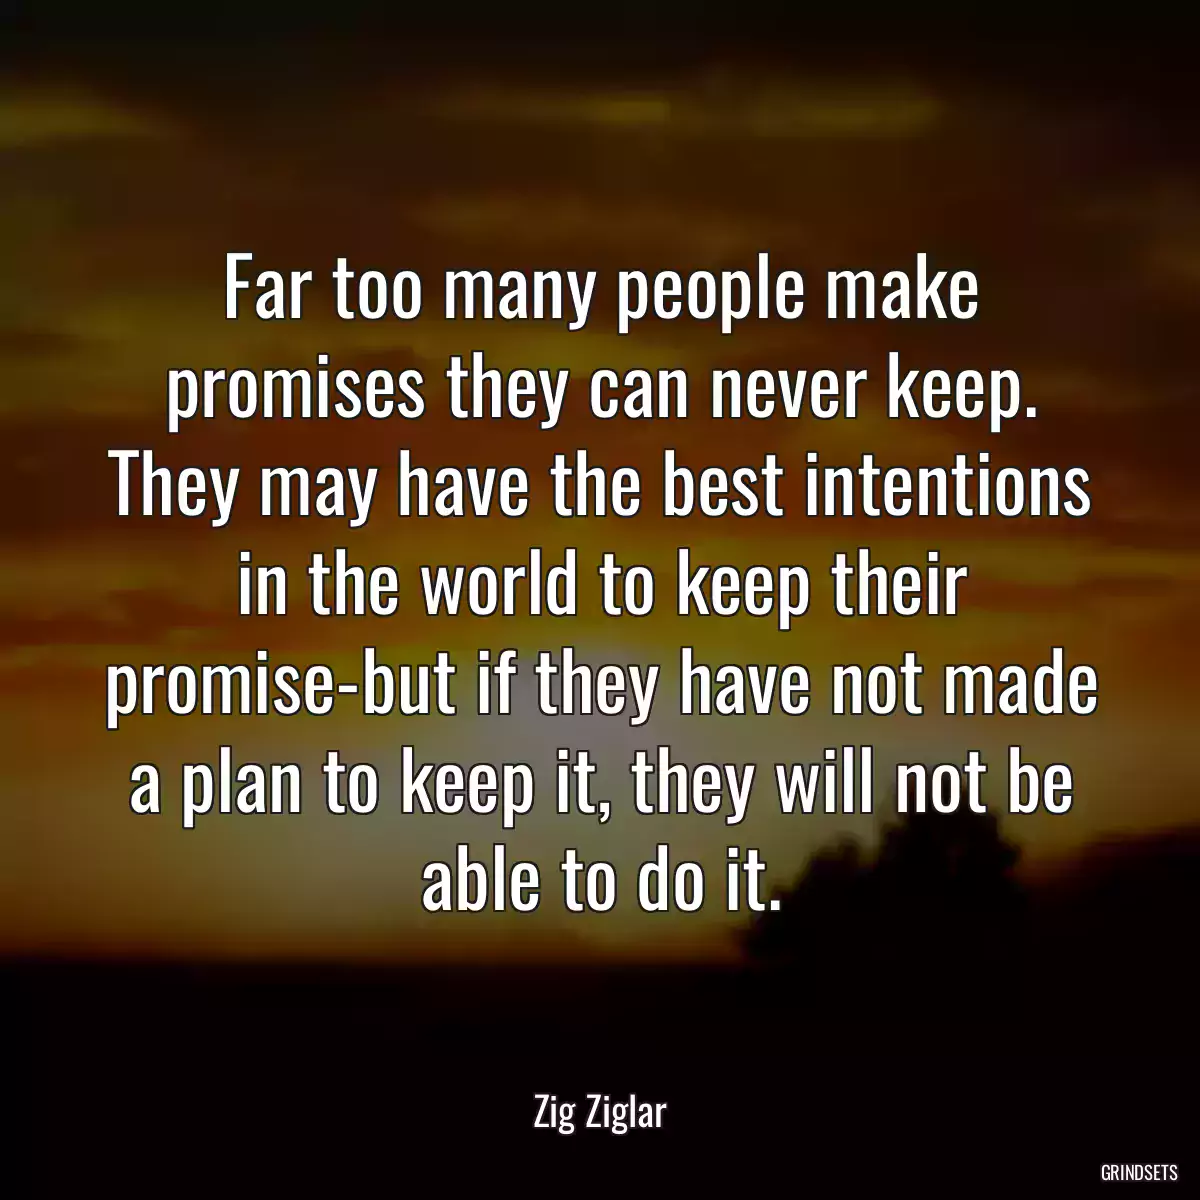 Far too many people make promises they can never keep. They may have the best intentions in the world to keep their promise-but if they have not made a plan to keep it, they will not be able to do it.